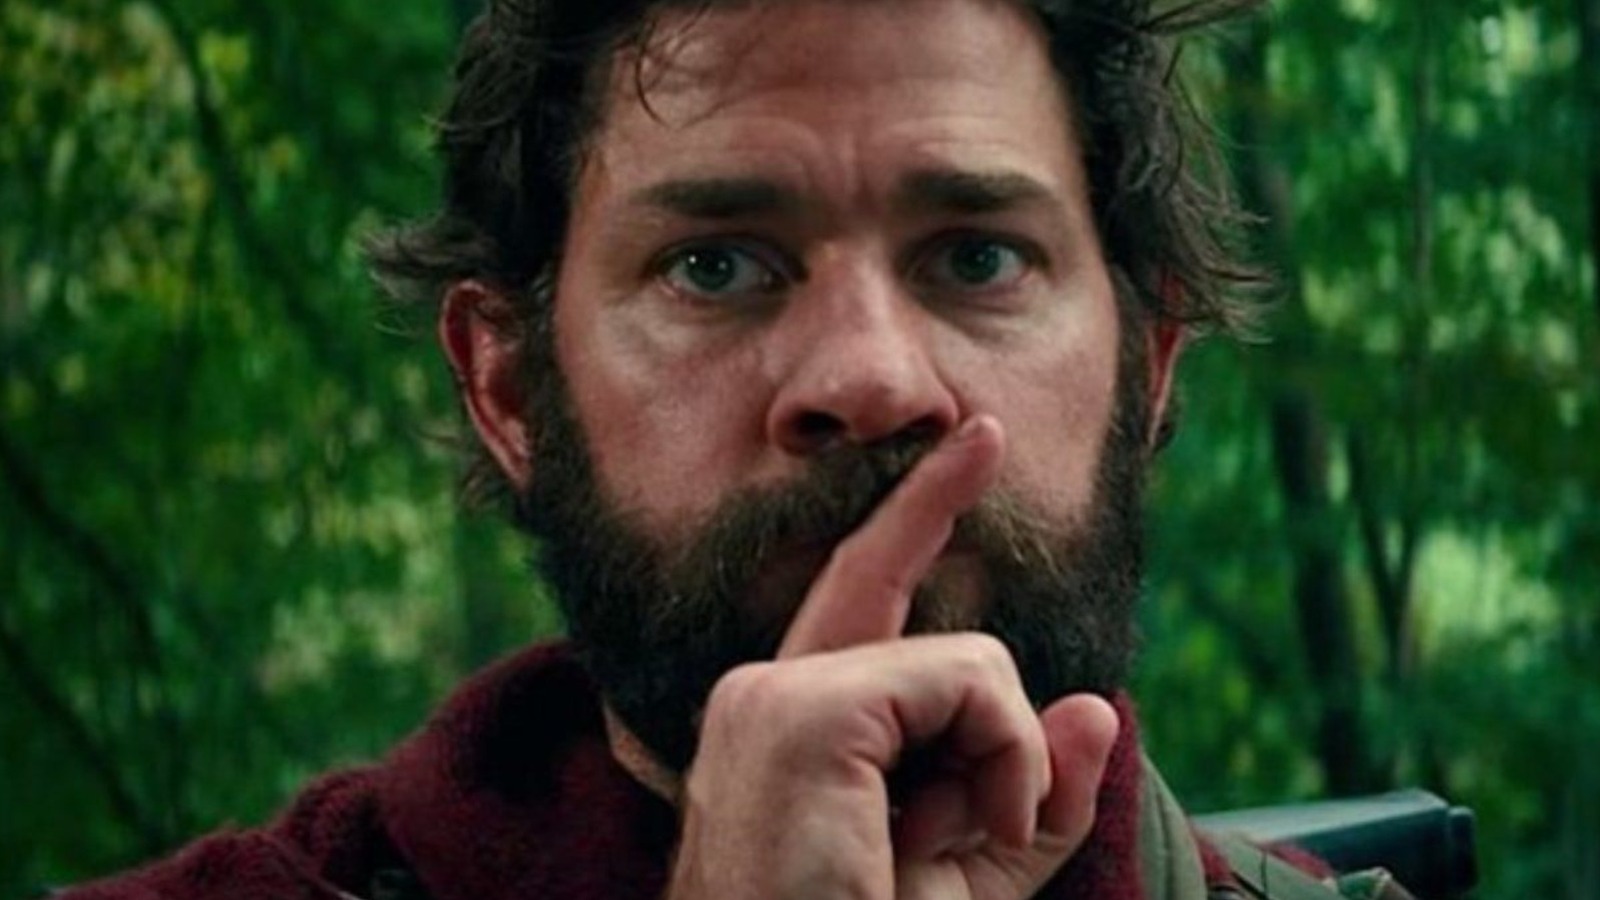 What Are the Monsters in “A Quiet place 1 and 2”?